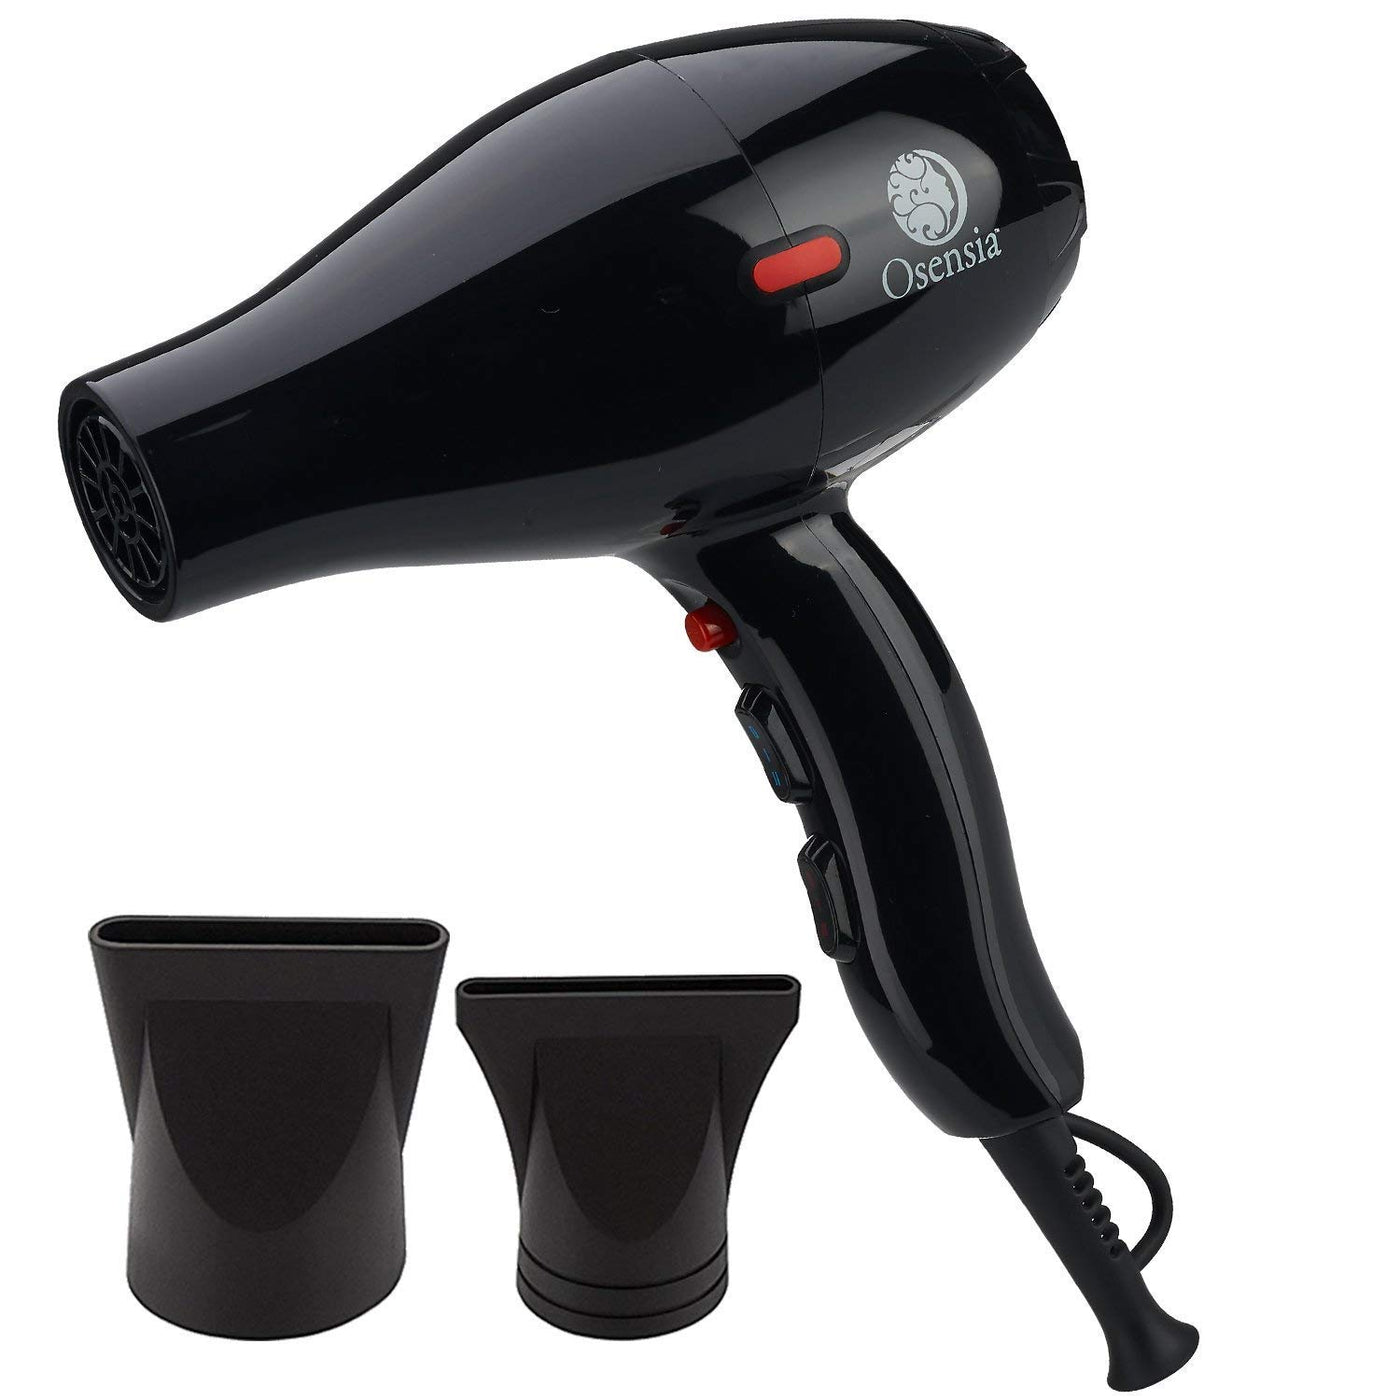 Professional Tourmaline Ionic Ceramic Blow Dryer with 2 Nozzle Attachments